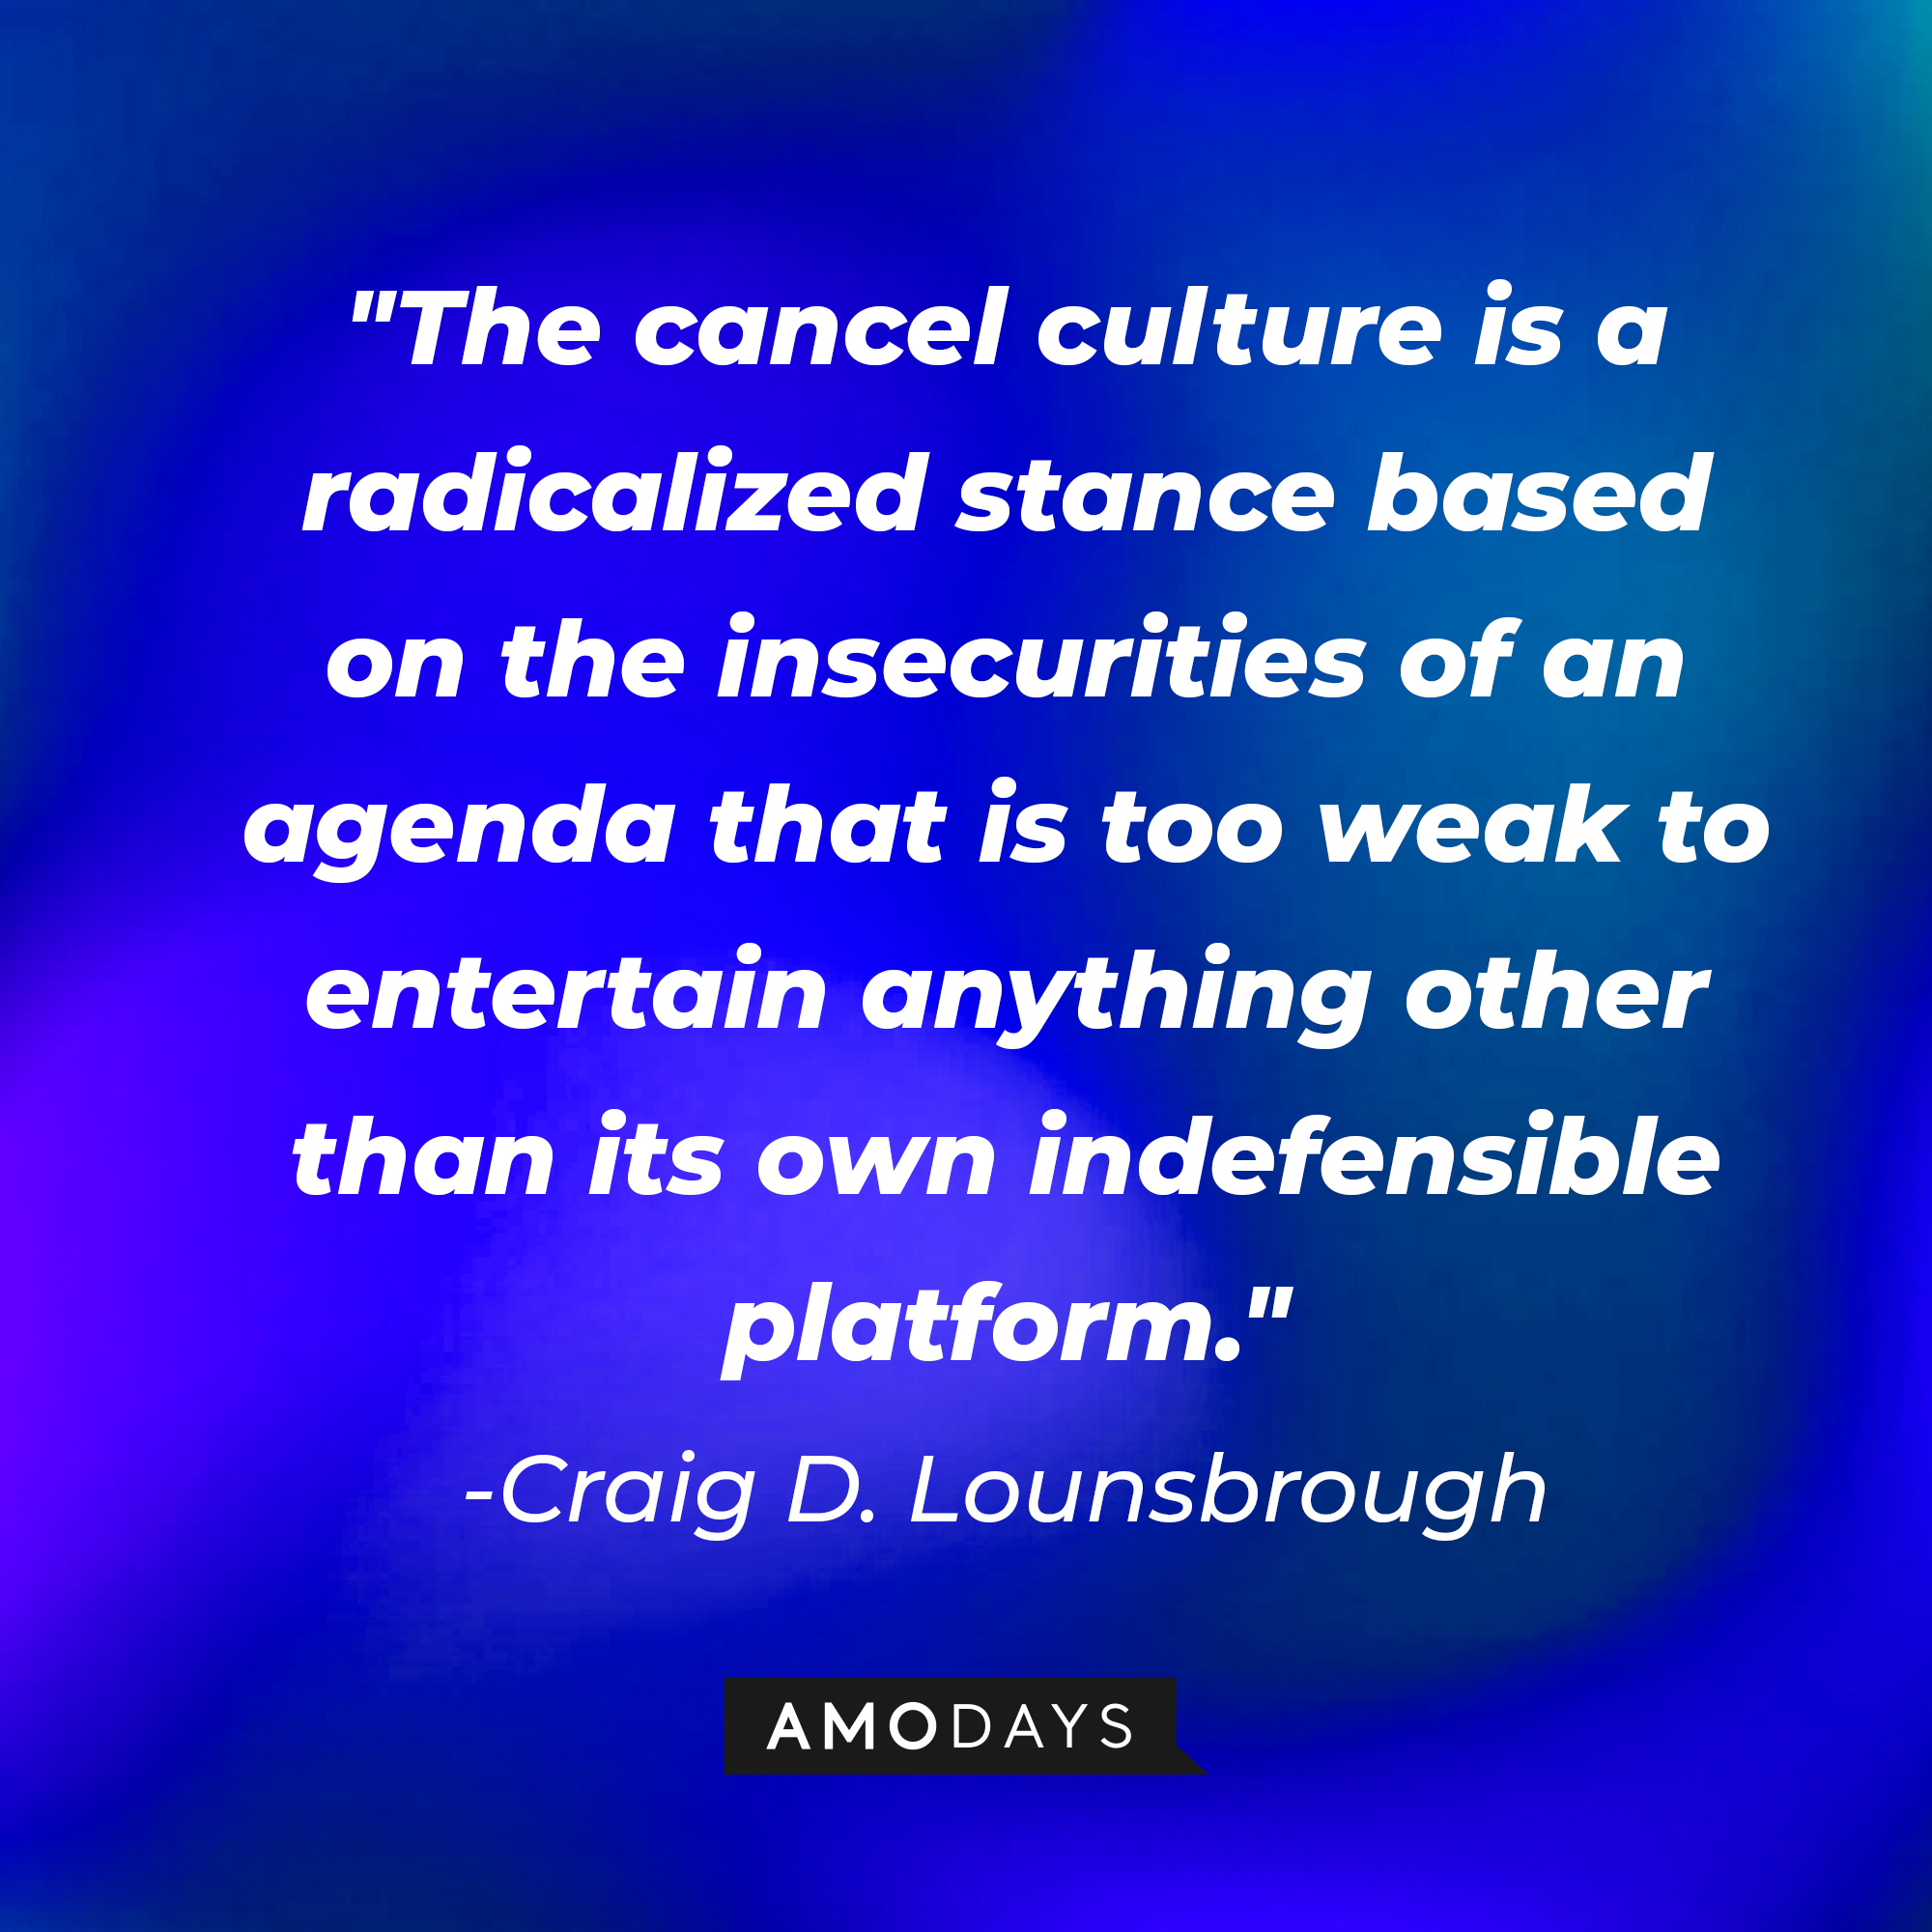 Craig D. Lounsbrough's quote: "The cancel culture is a radicalized stance based on the insecurities of an agenda that is too weak to entertain anything other than its own indefensible platform." | Source: AmoDays